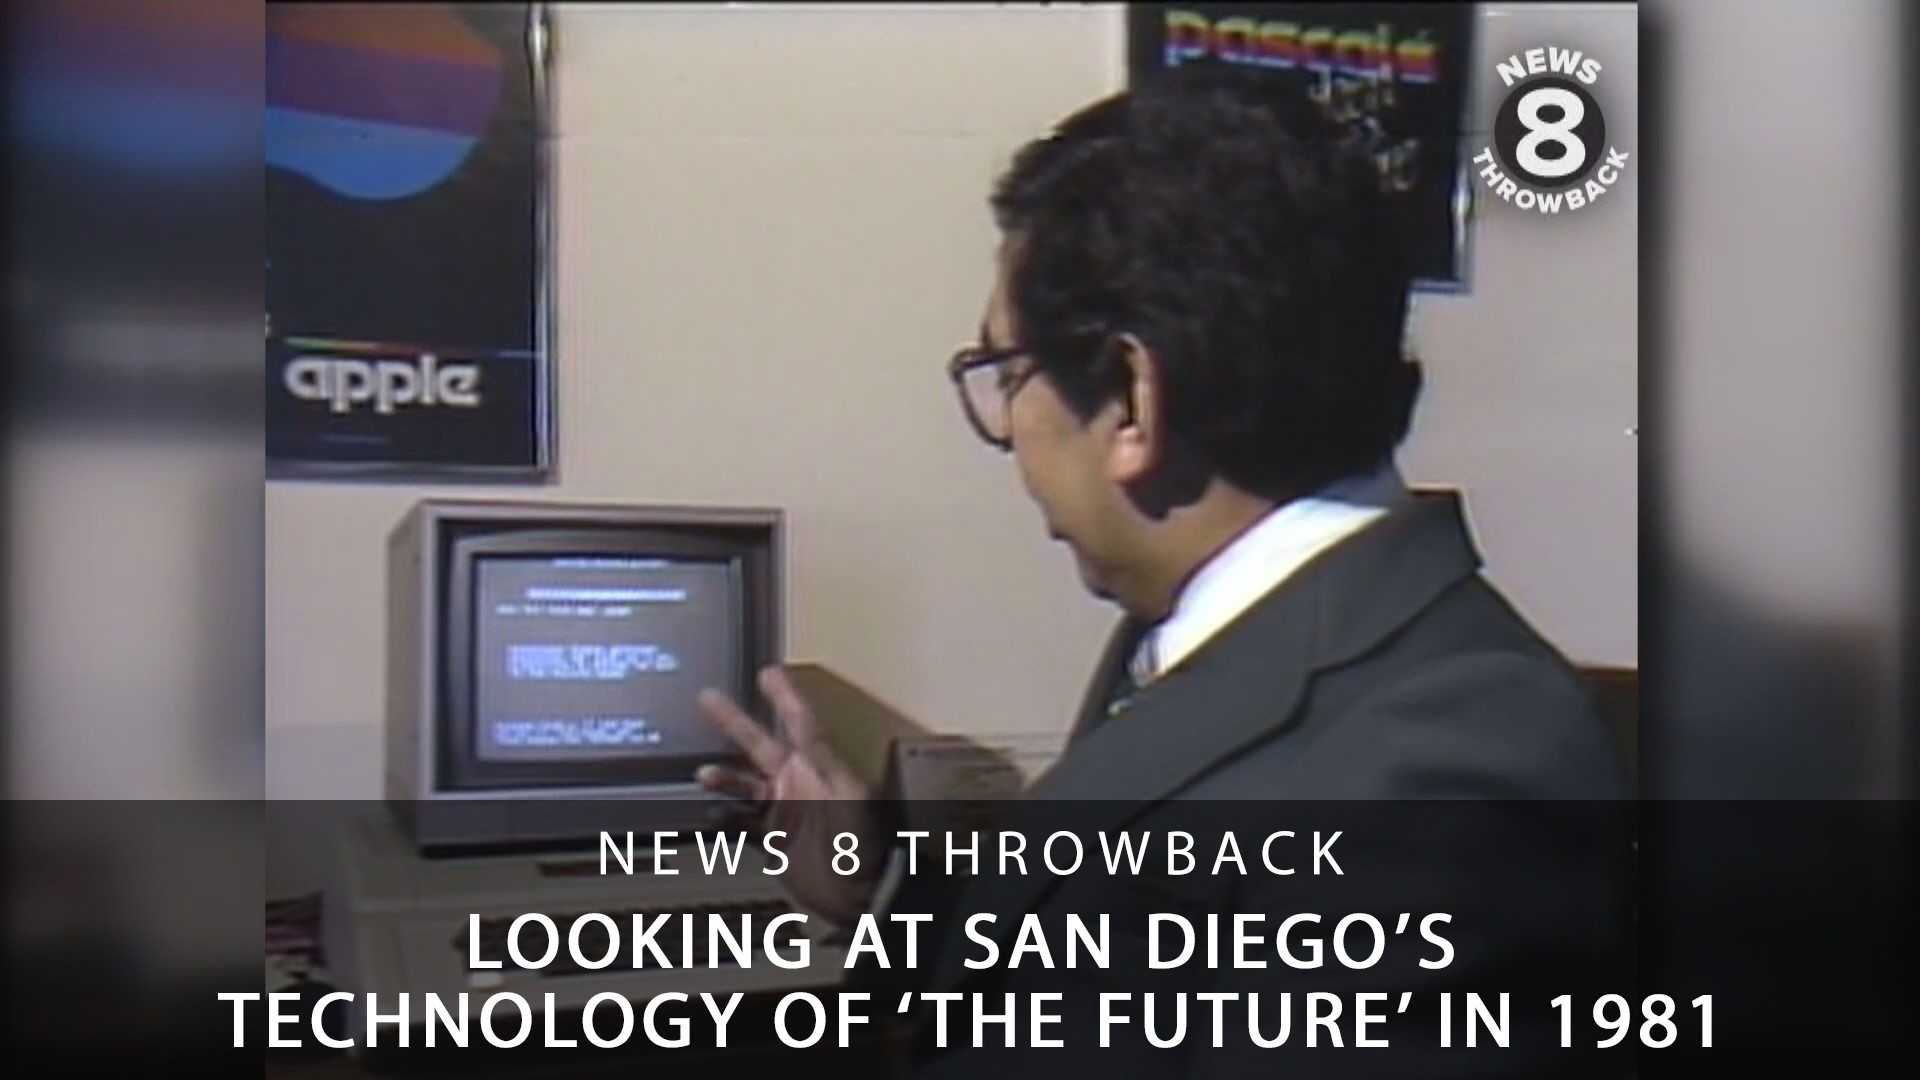 A look at 'the future' in 1981